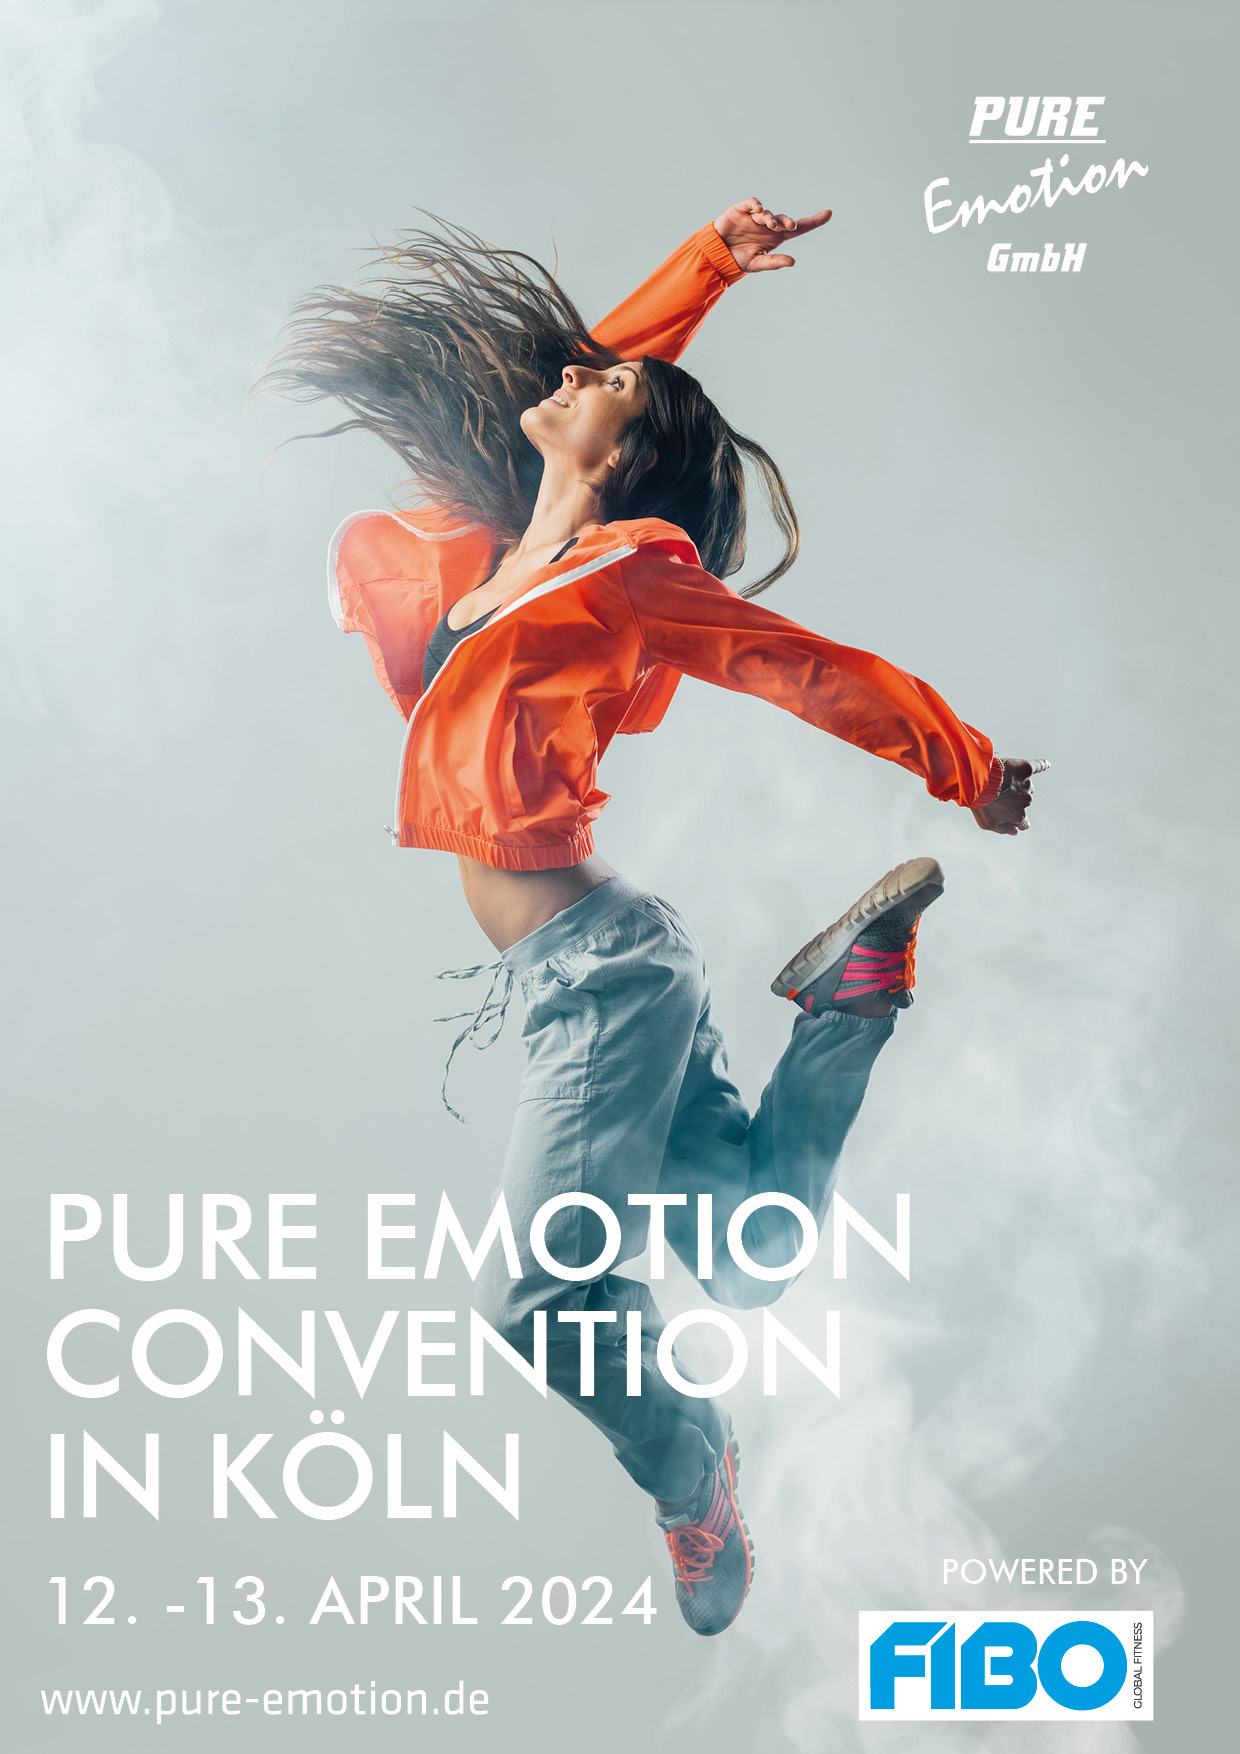 12. - 13.04.2024 - Pure Emotion Convention in Köln powered by FIBO